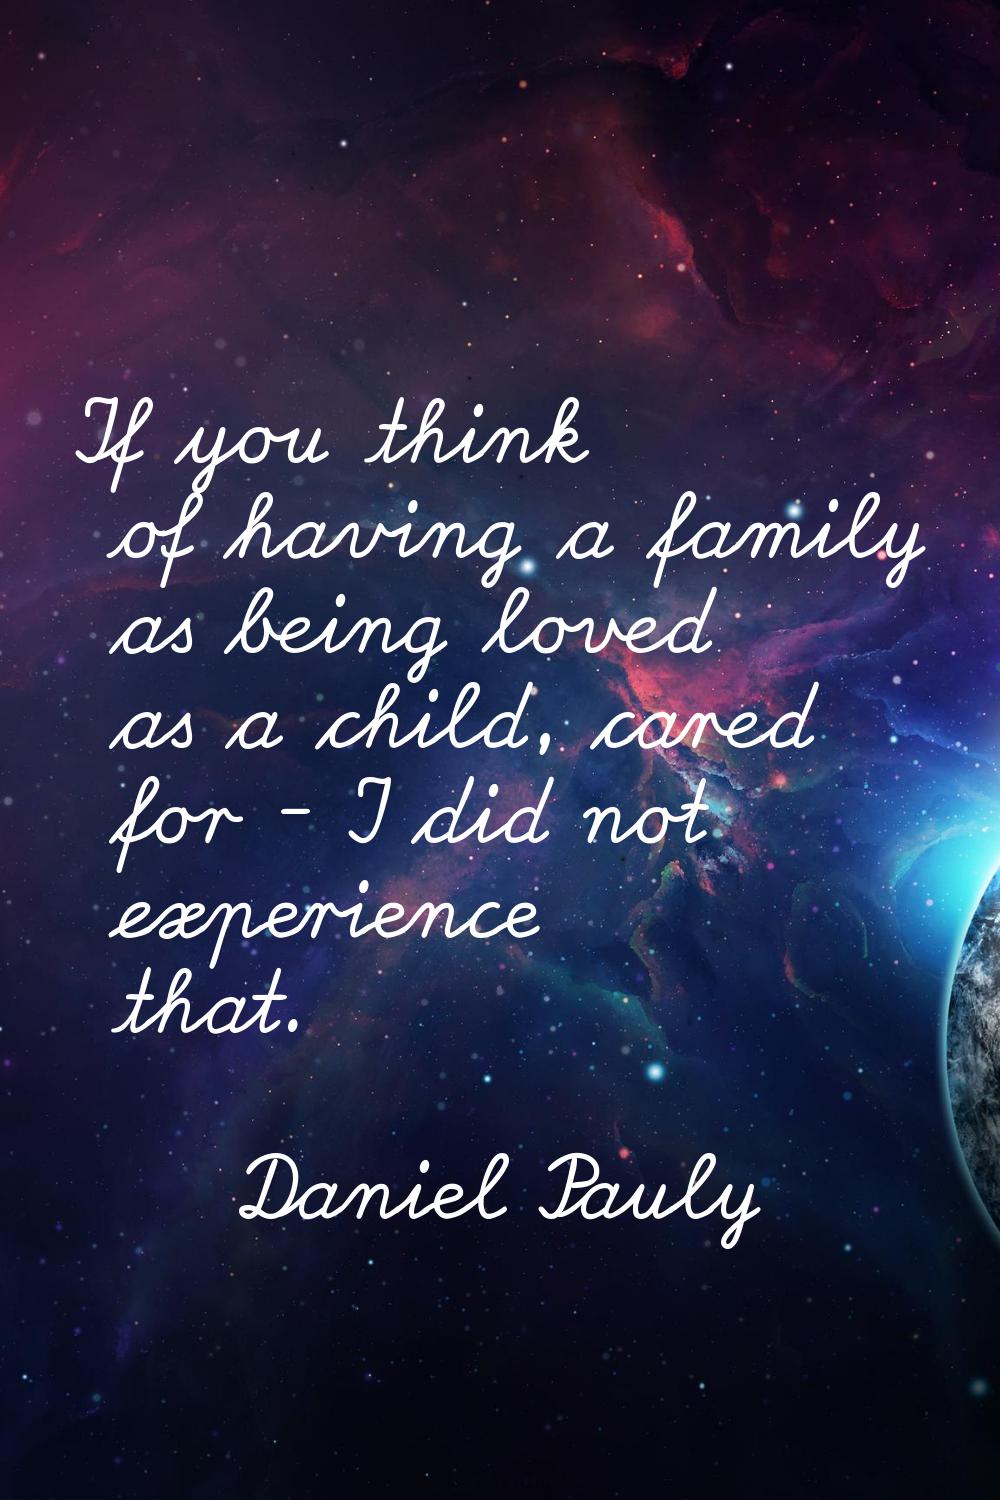 If you think of having a family as being loved as a child, cared for - I did not experience that.